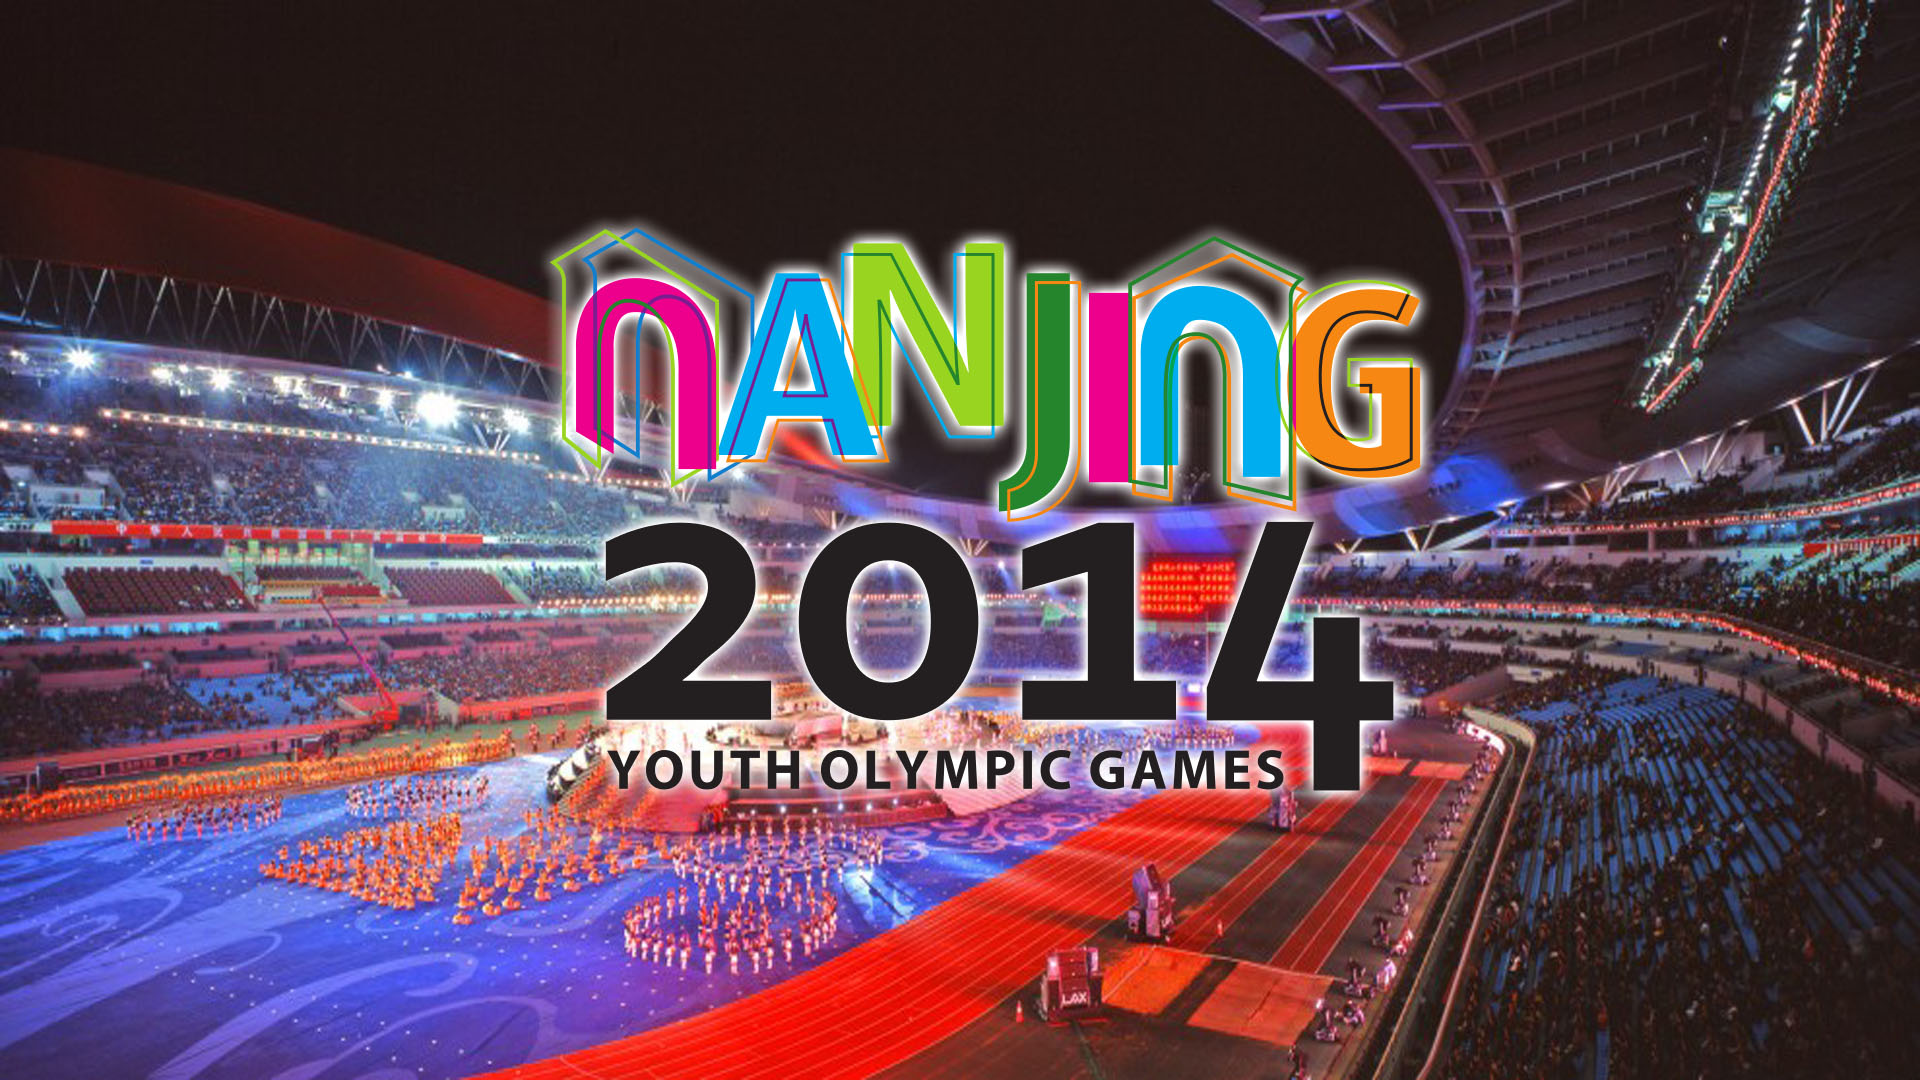 Nanjing Youth Olympics Events 2014